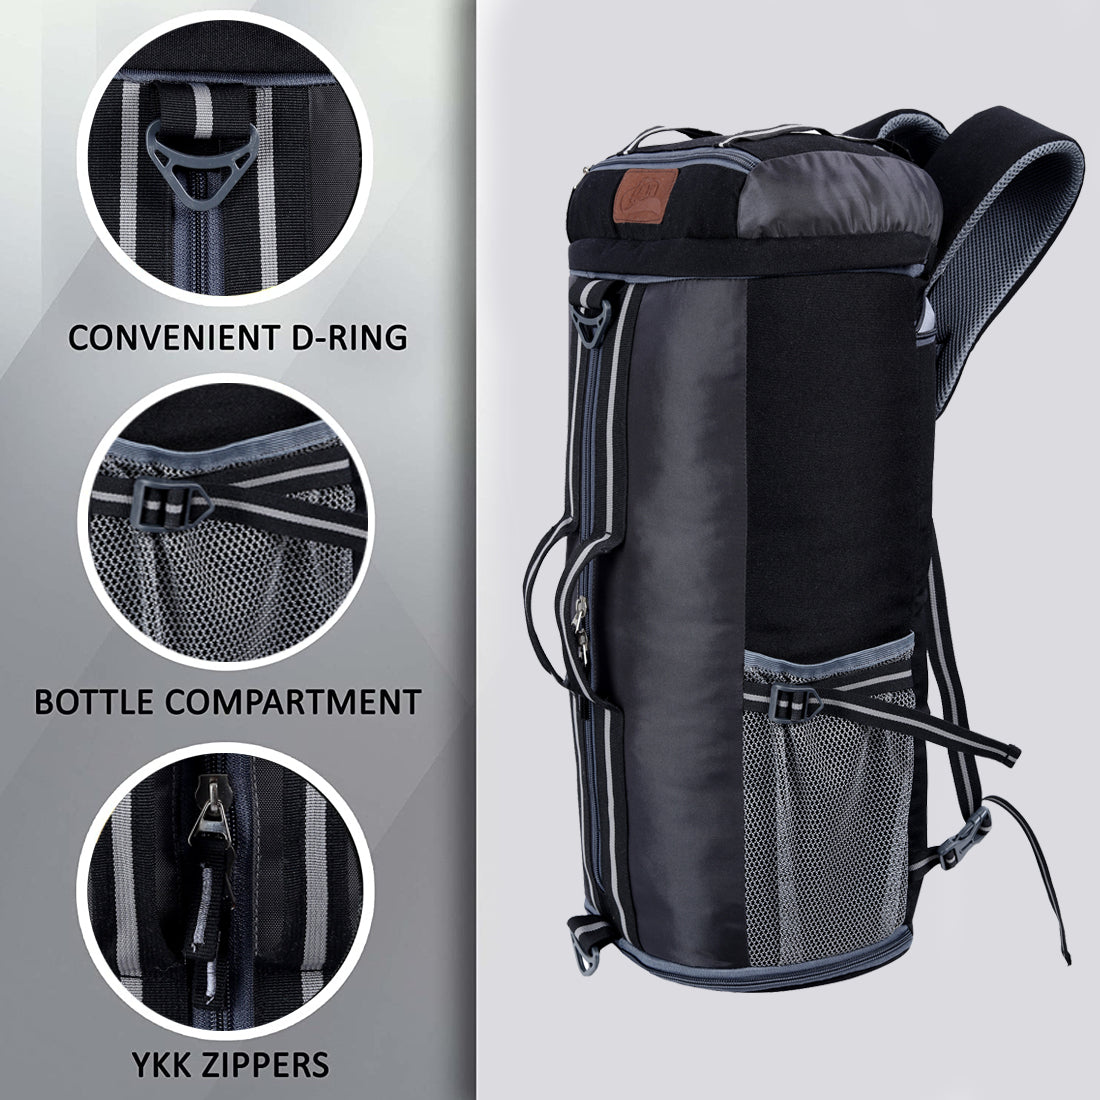 Black & Grey Casual Trekking Rucksack Bag With Shoe Compartment